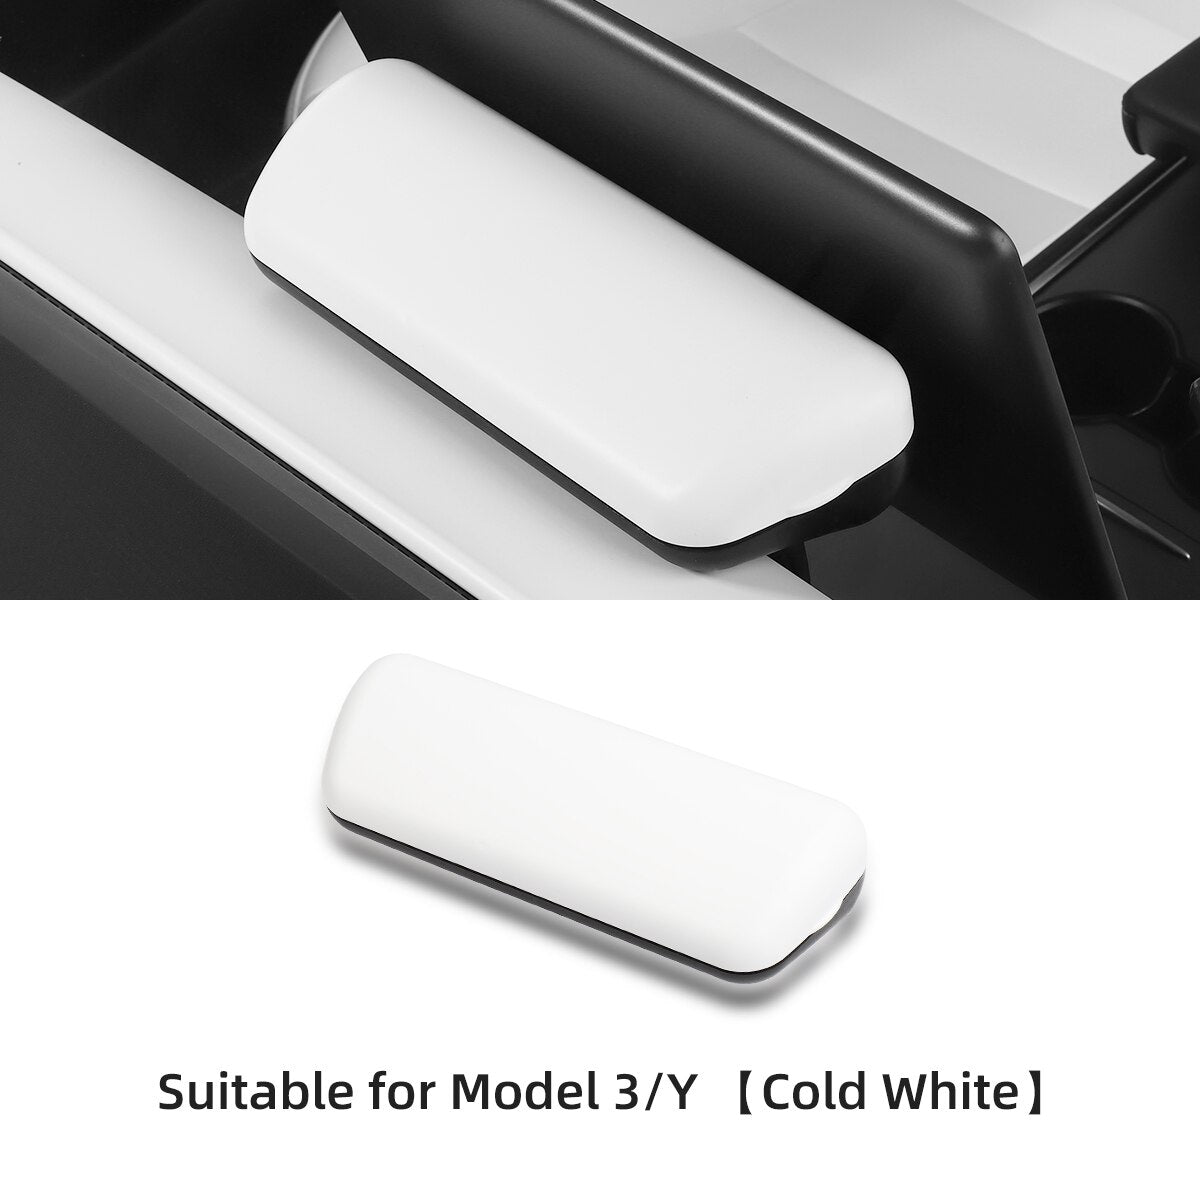 For Tesla Model3 ModelY 2021-2023 Car Modification Accessories ABS Glasses HolderStorage Box Dashboard Sunglasses Case Organizer